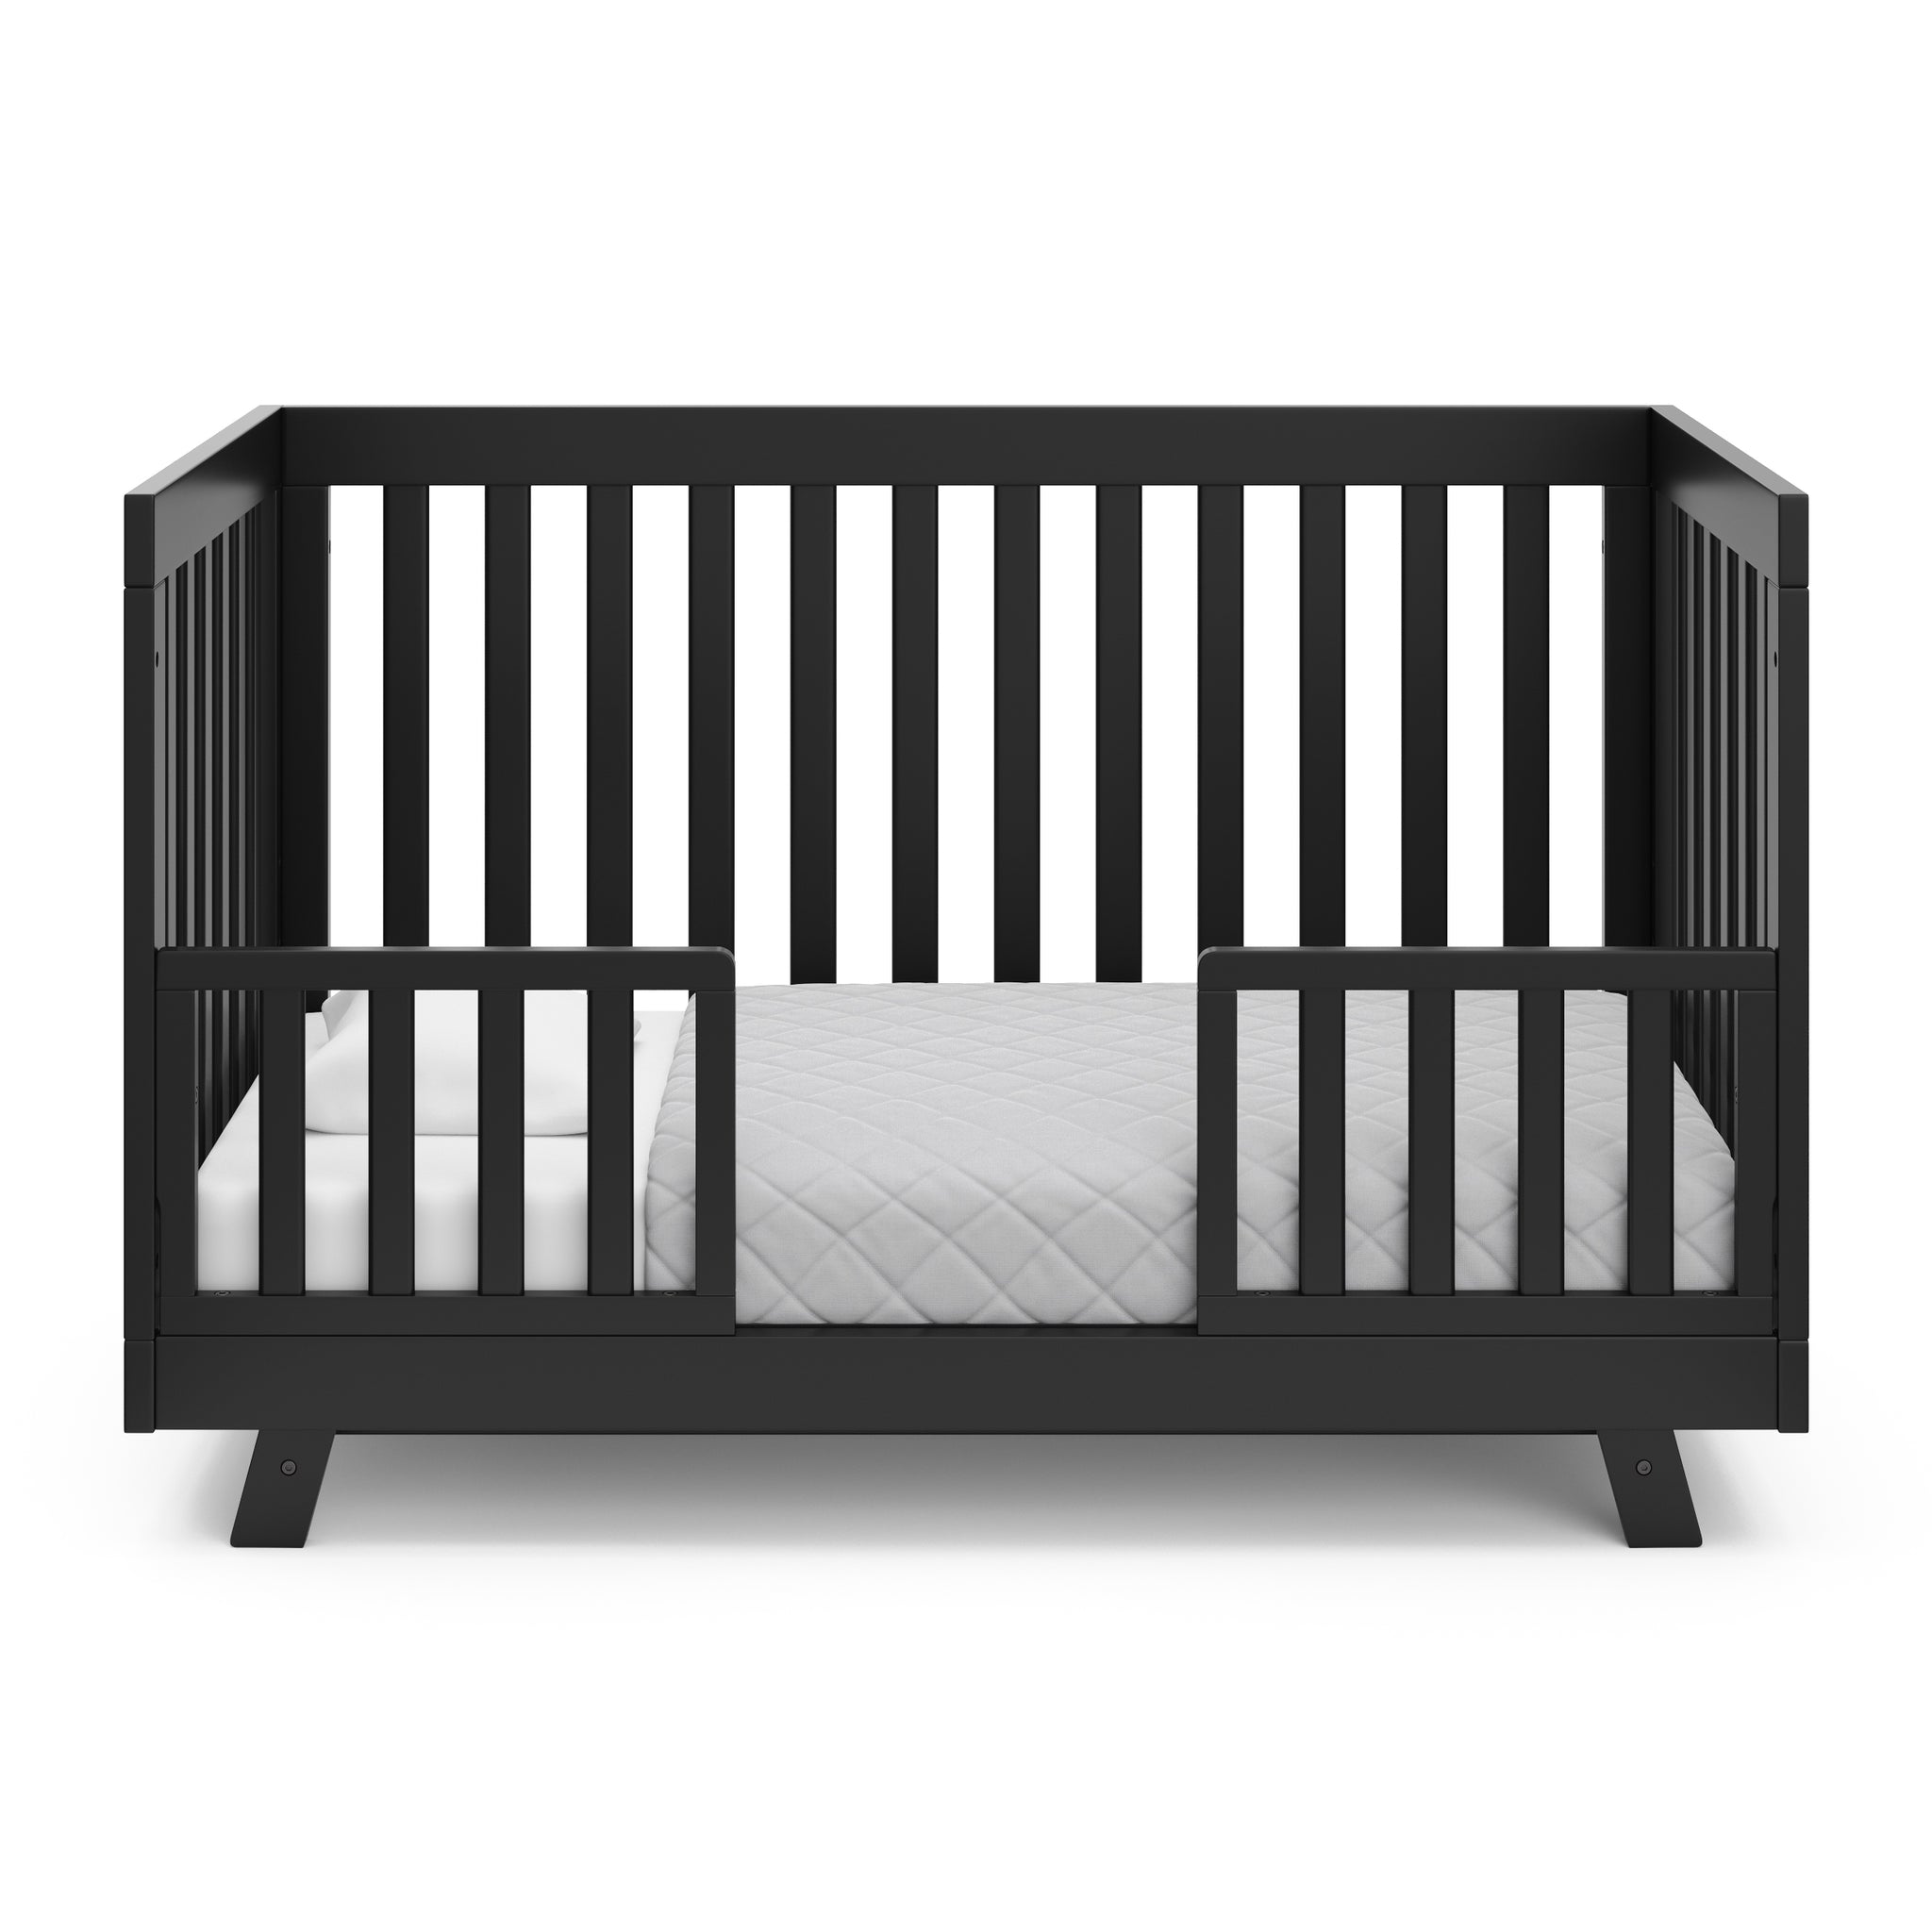 Black crib in toddler bed conversion with two safety guardrails